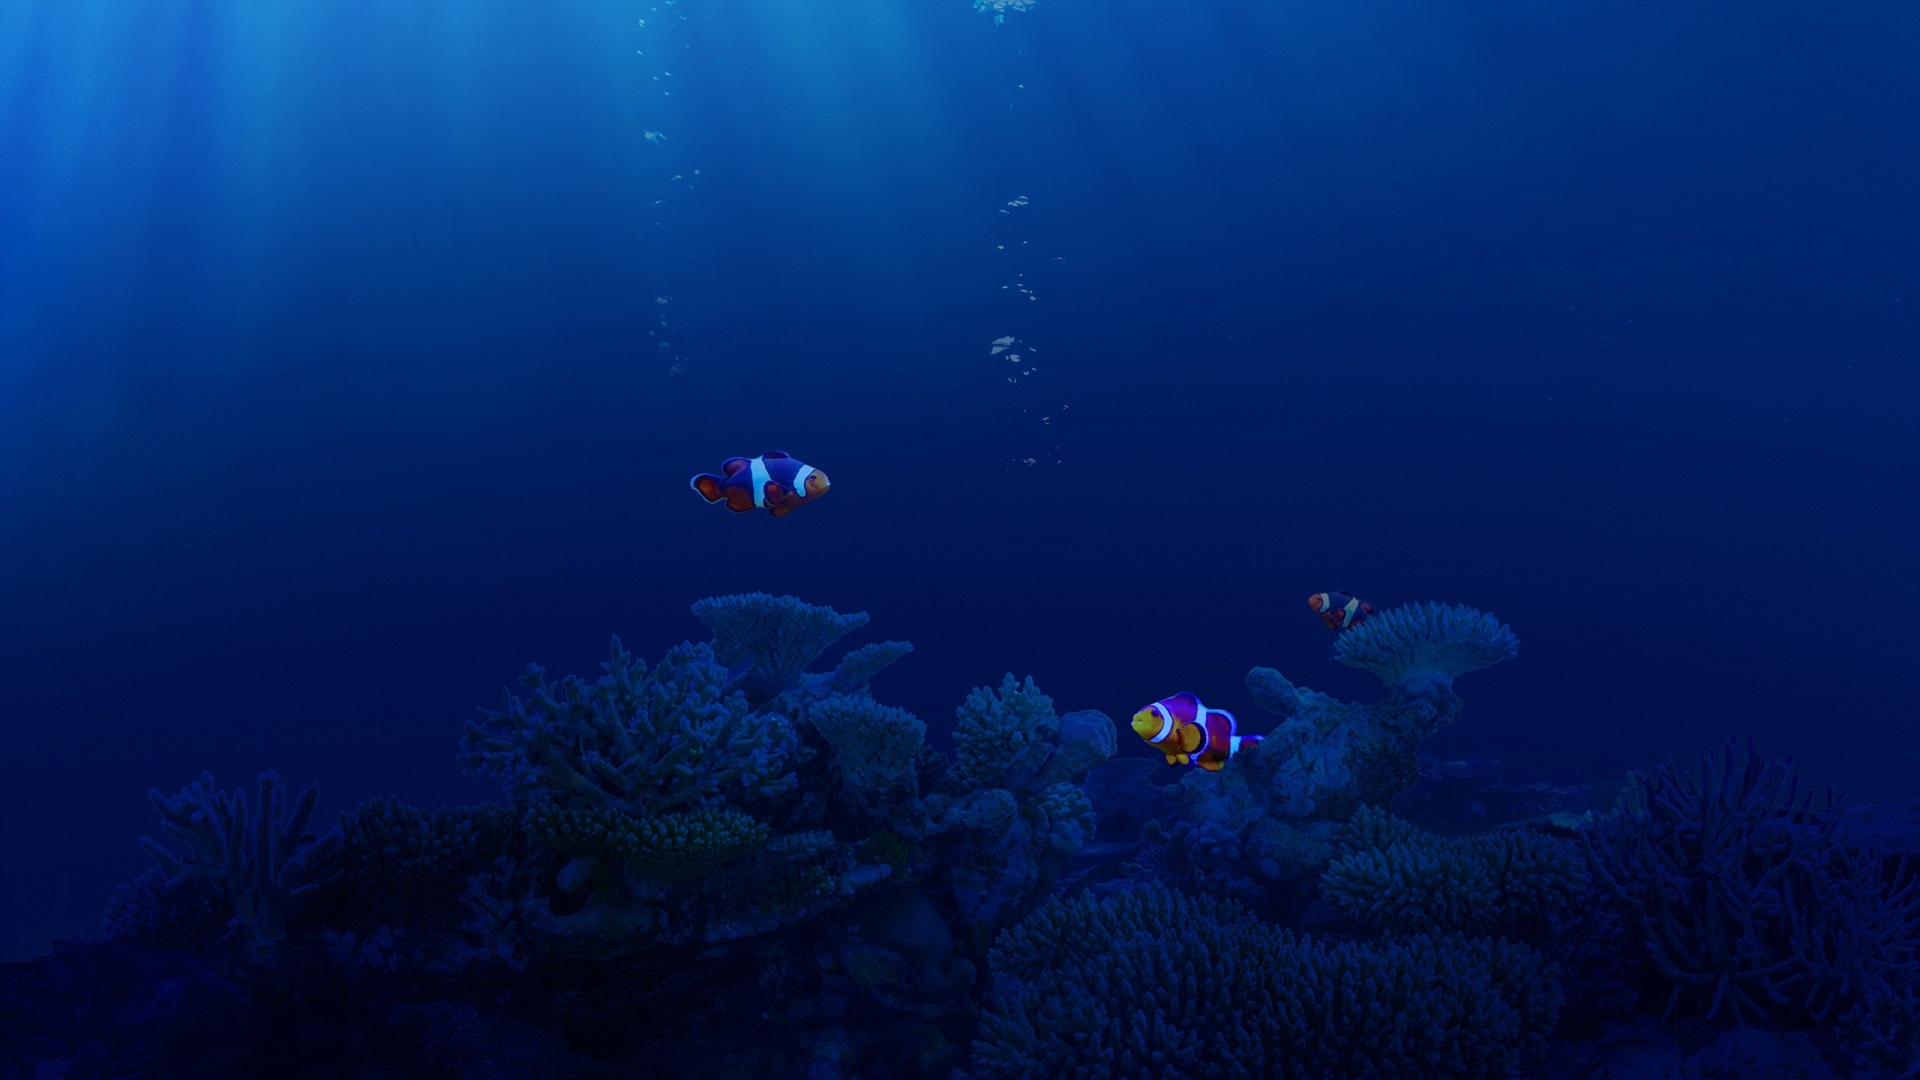 Finding Nemo Wallpaper  All disney pics found on web Thoug  Flickr